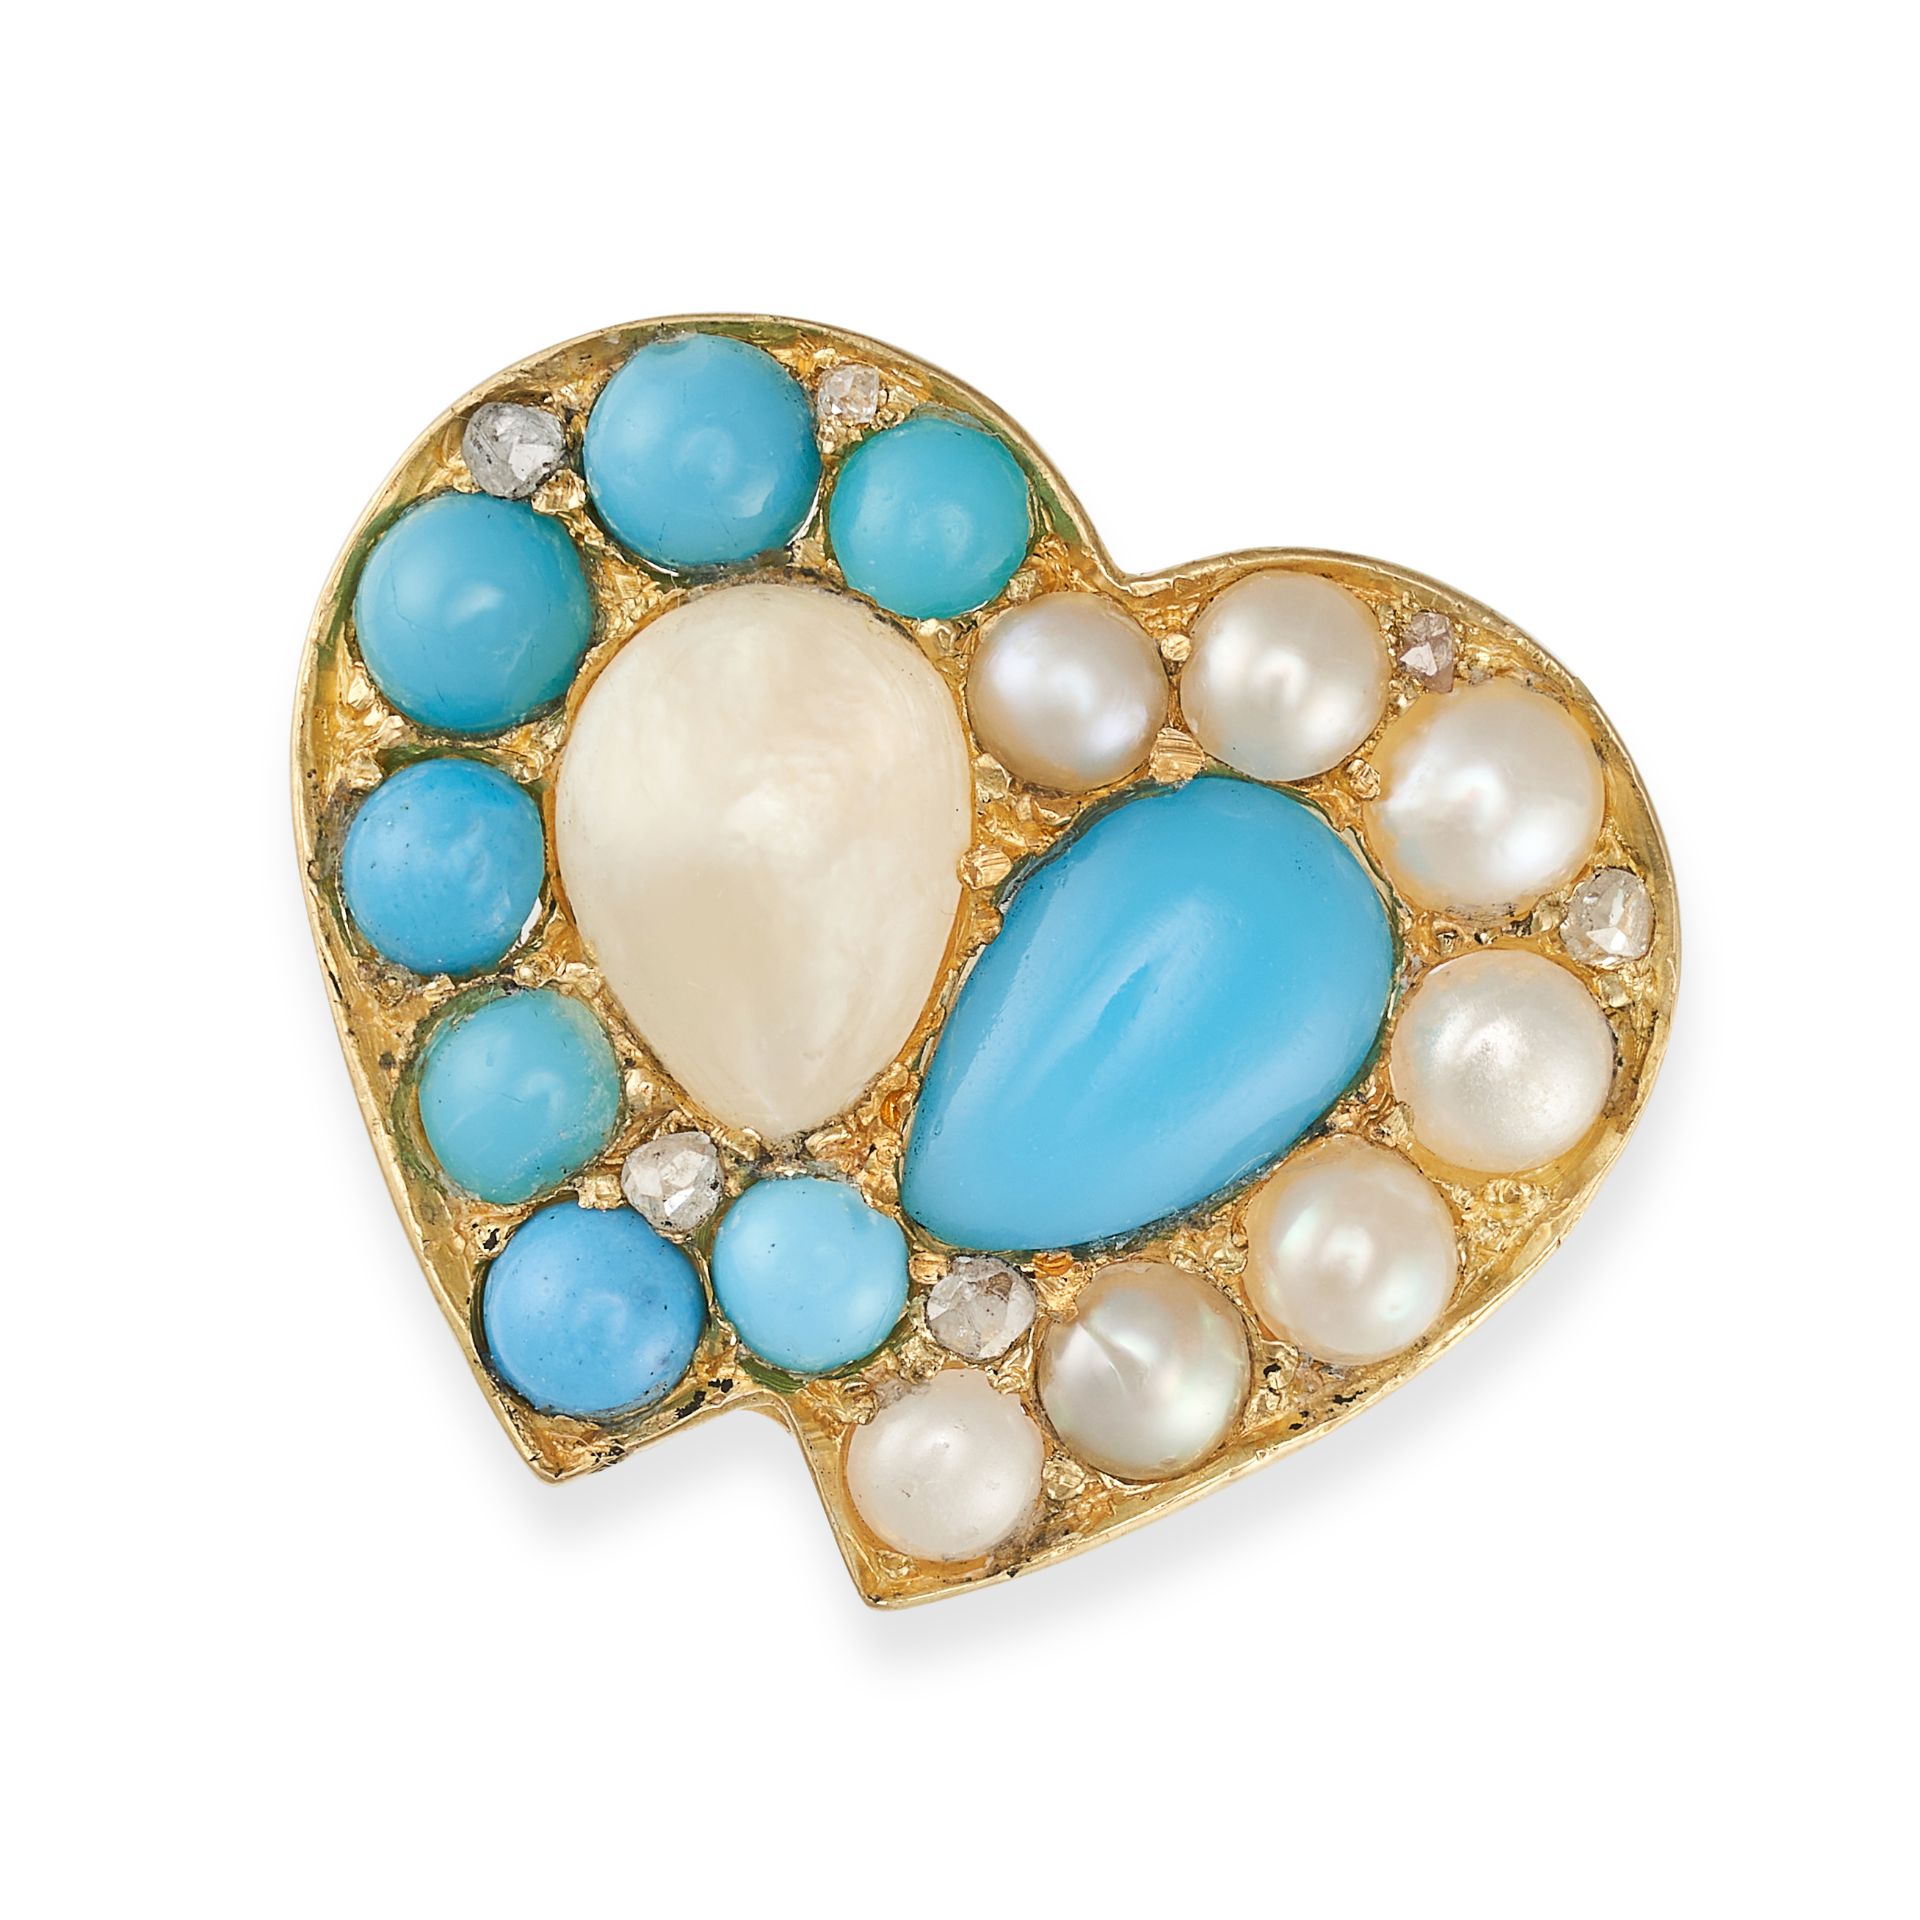 A TURQUOISE, PEARL AND DIAMOND SWEETHEART RING in yellow gold, designed as two interlocking heart...